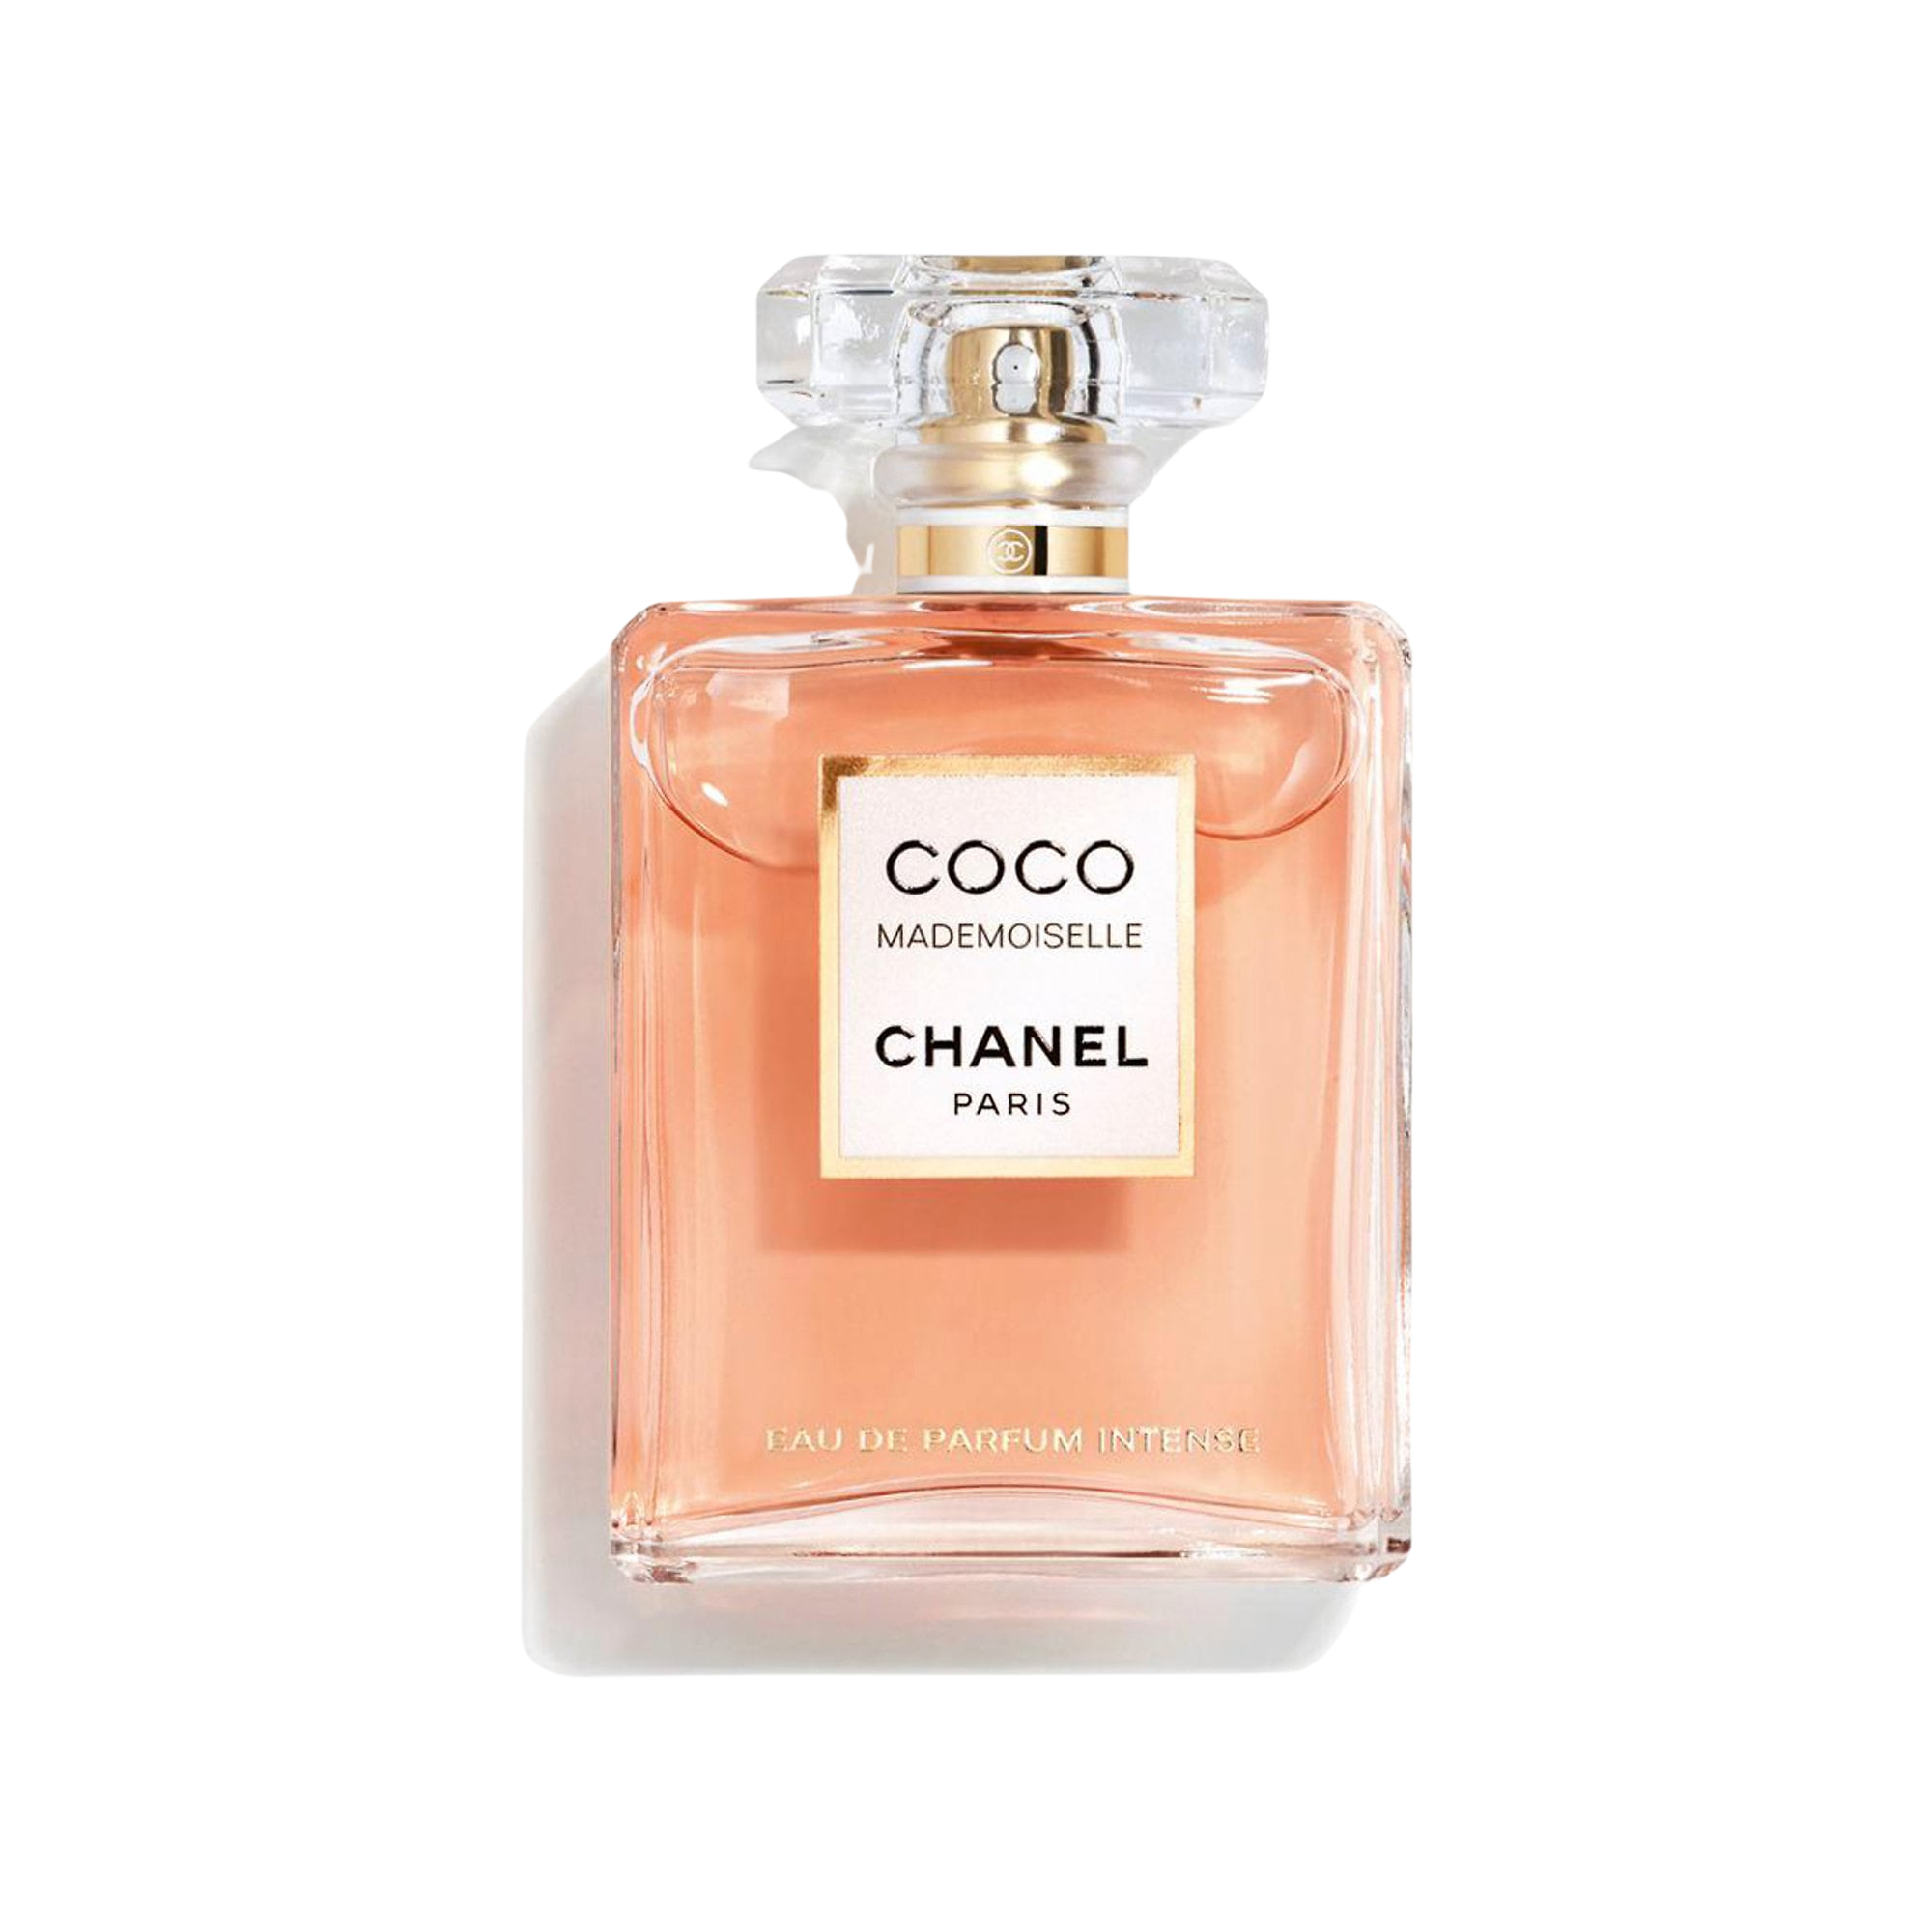 37 Chanel Perfume Samples Images, Stock Photos, 3D objects, & Vectors